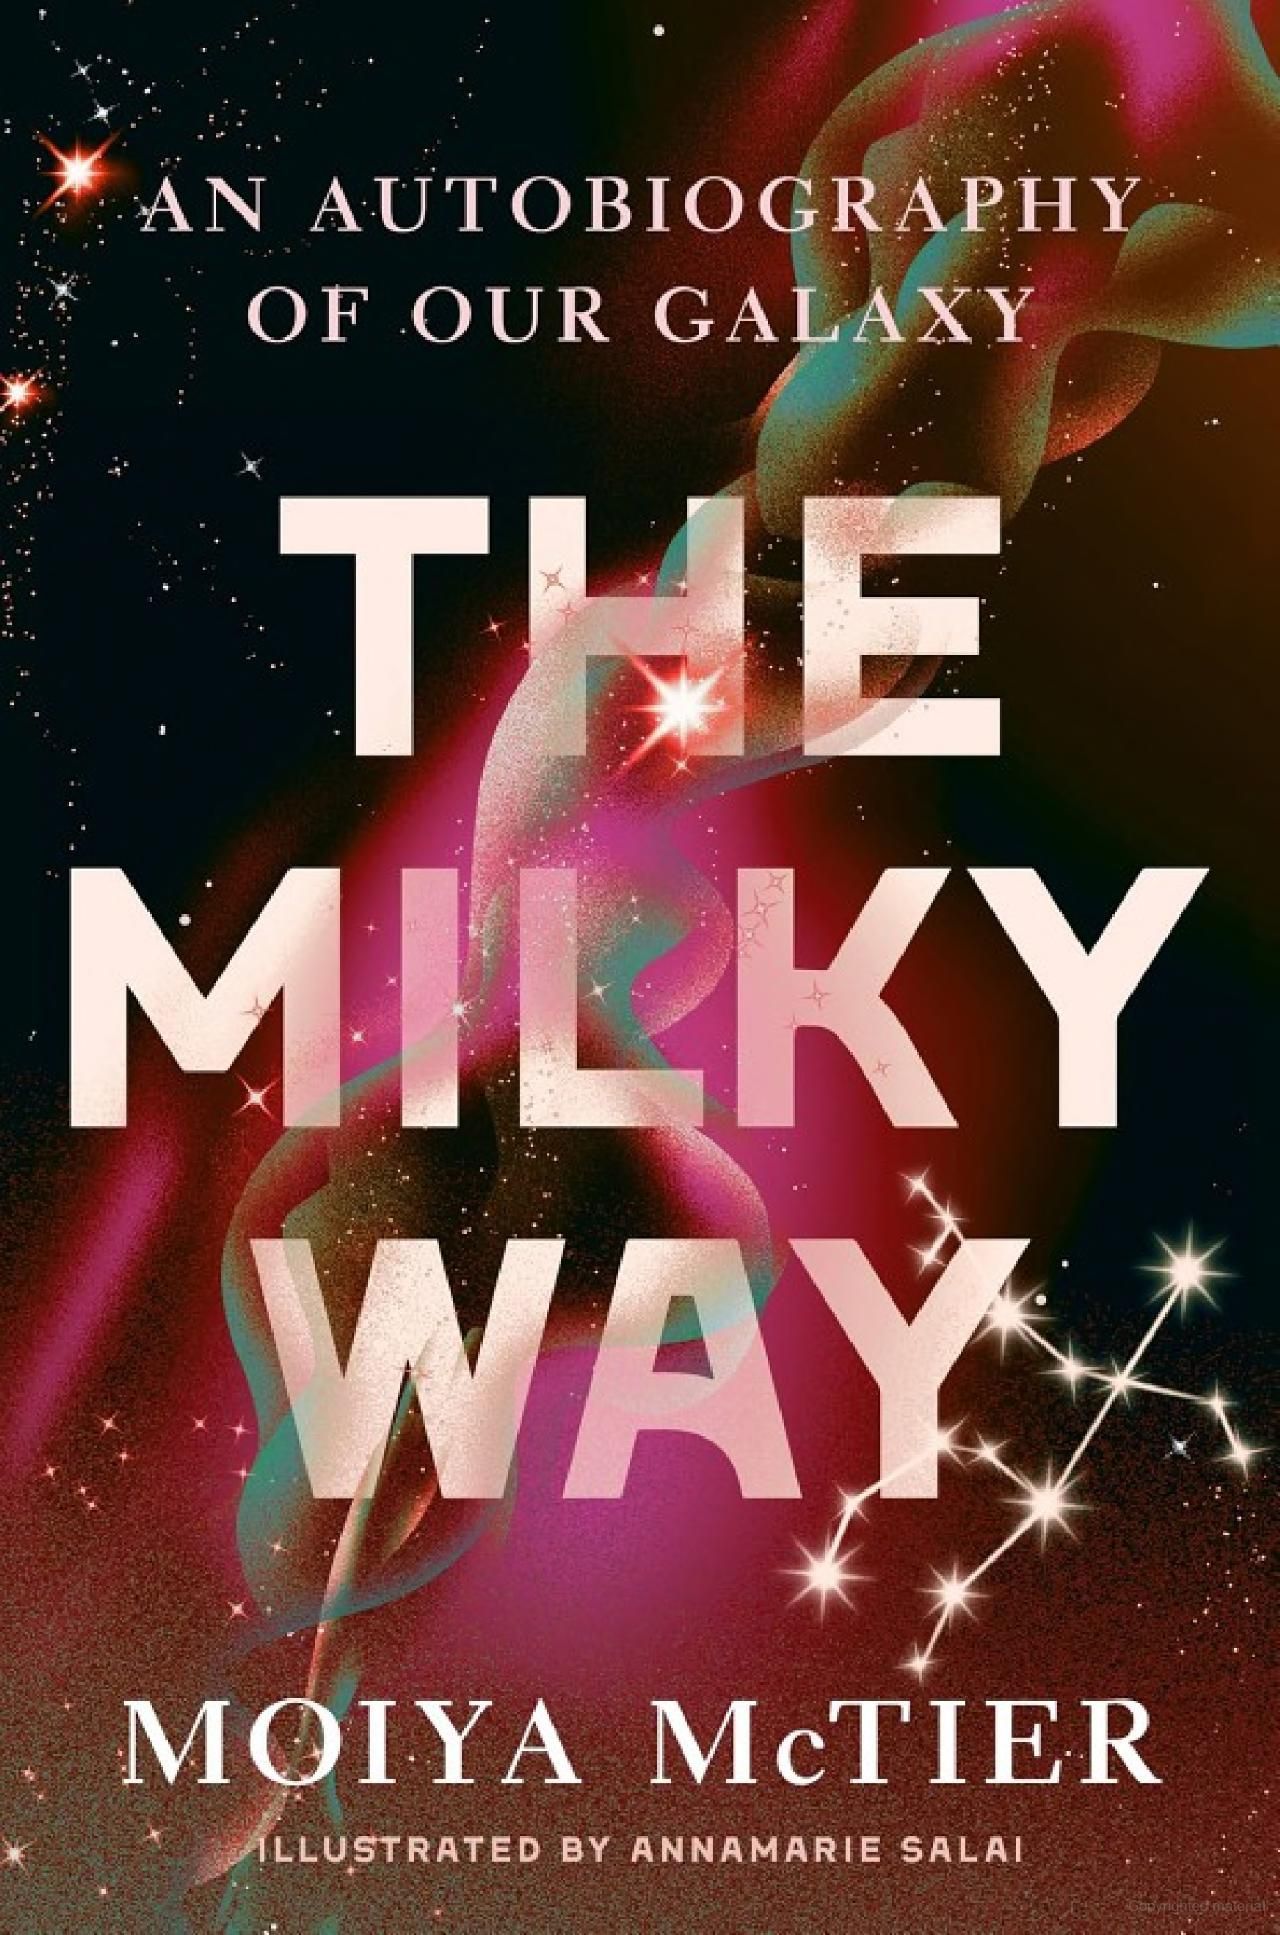 Hurray for Inventing New Genres or Whatever: On Dr. Moiya McTier’s “The Milky Way”